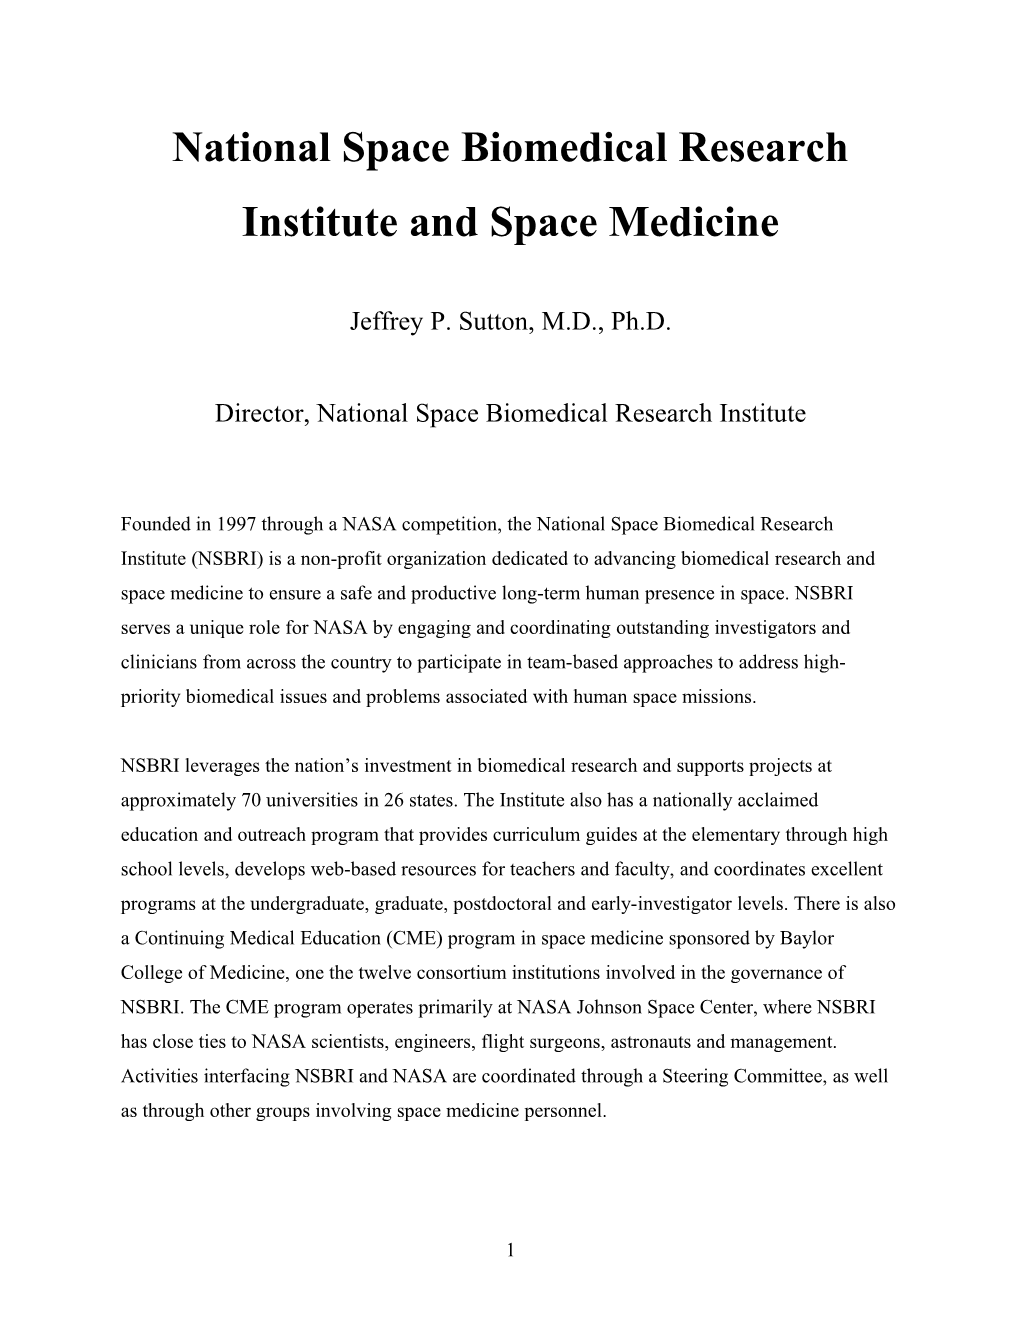 National Space Biomedical Research Institute and Space Medicine Research